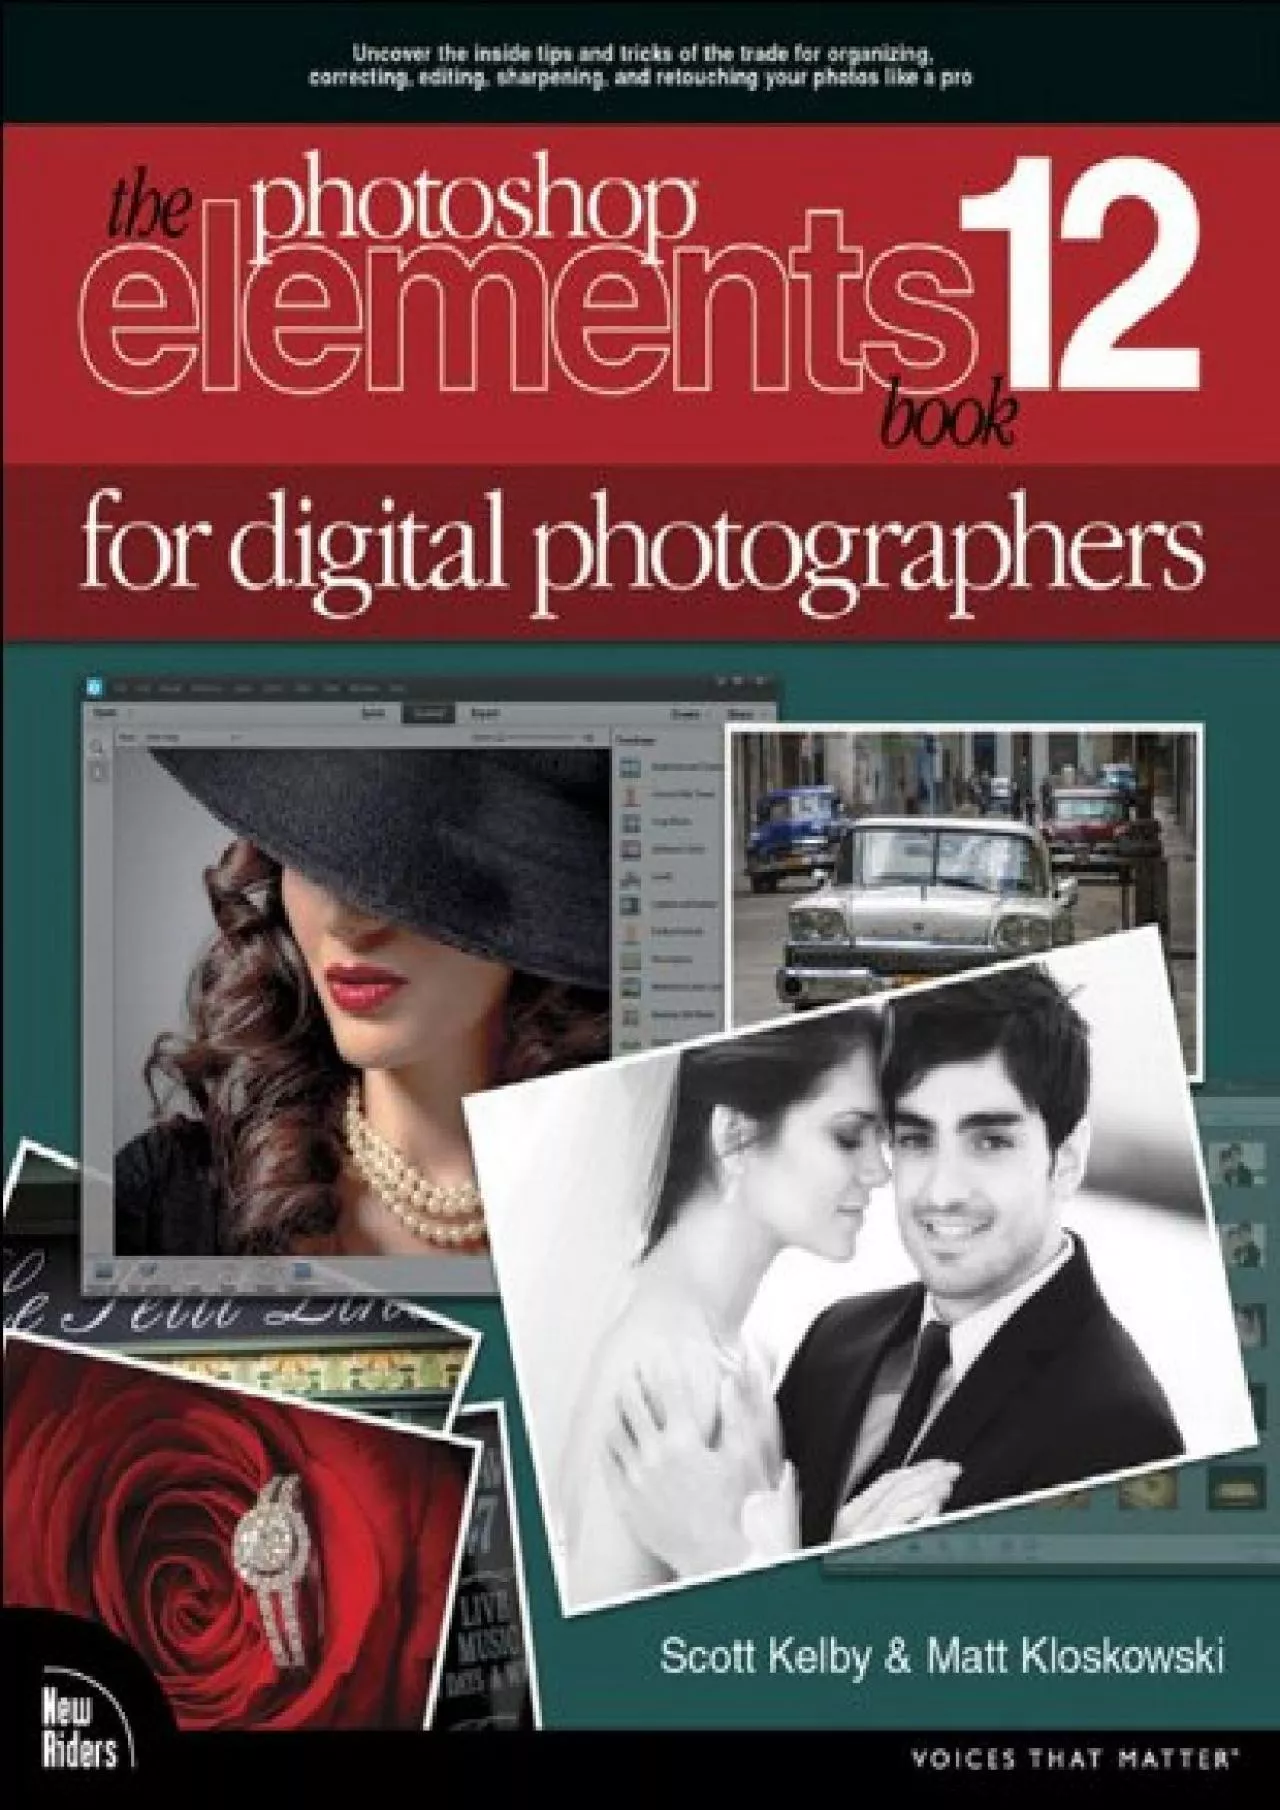 (DOWNLOAD)-Photoshop Elements 12 Book for Digital Photographers, The (Voices That Matter)